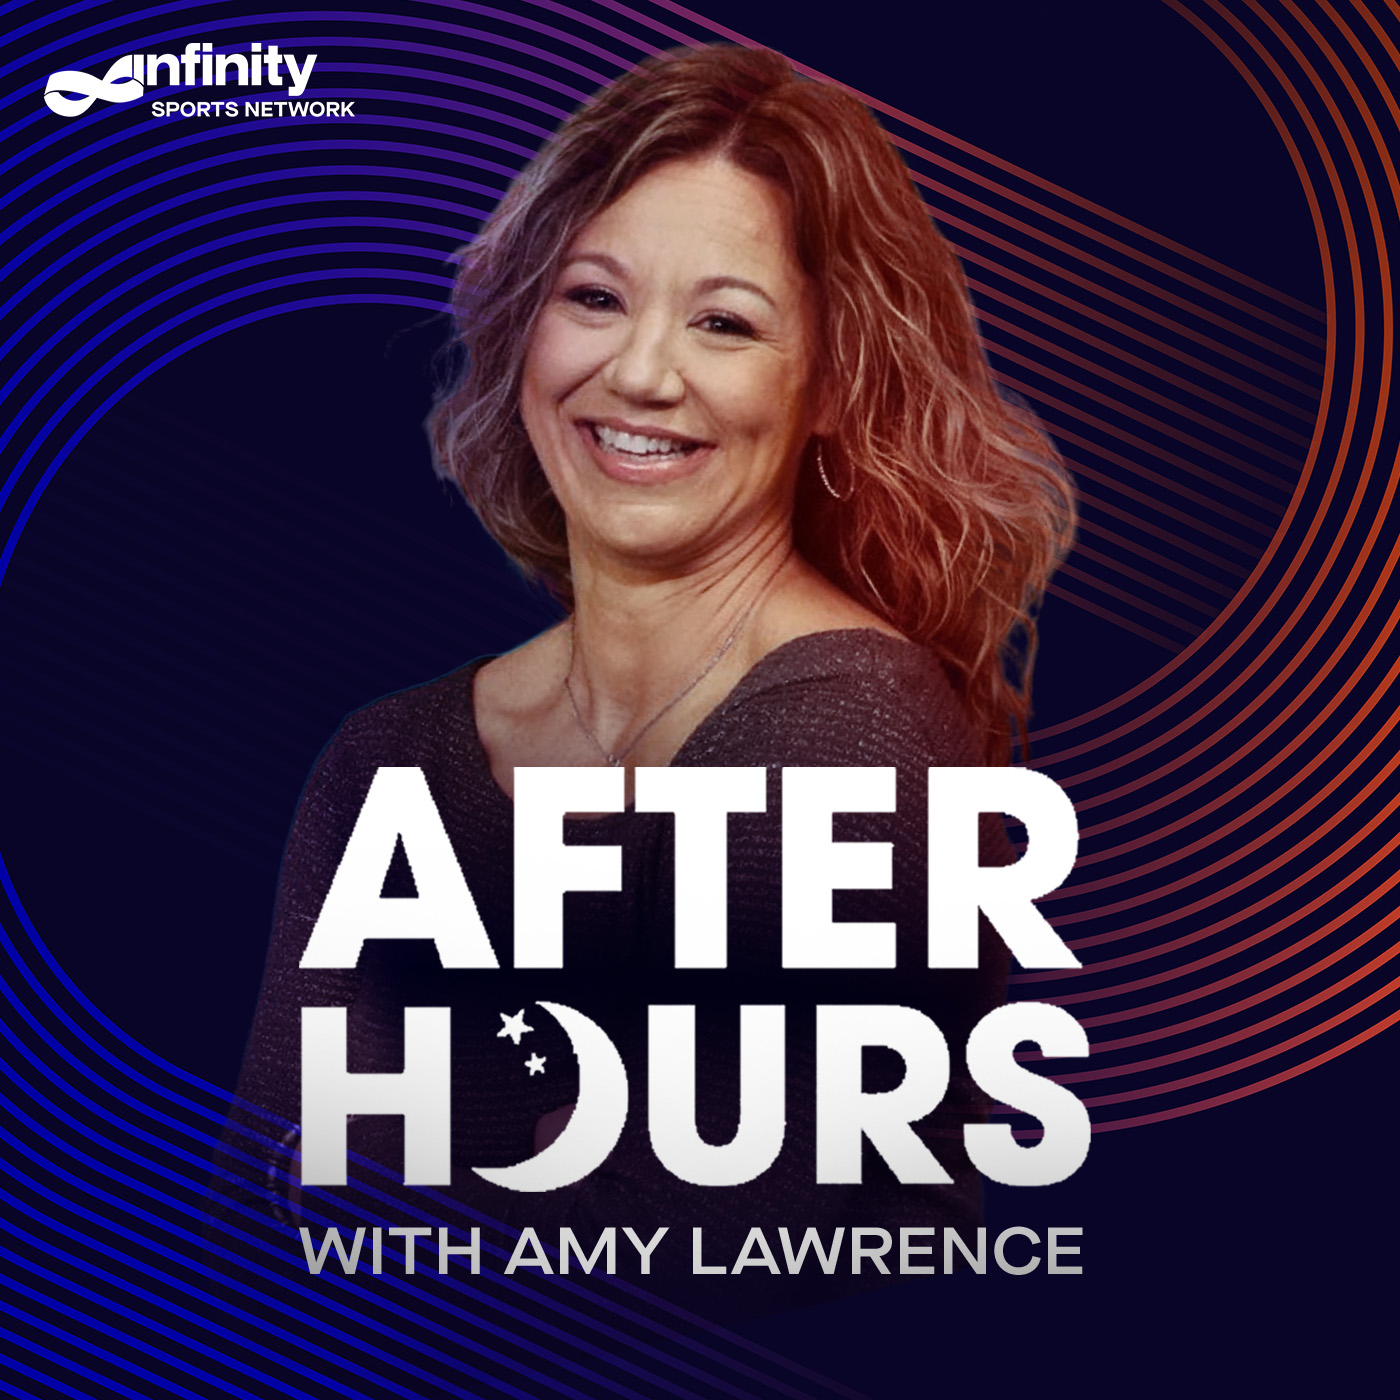 4/22/21 After Hours with Amy Lawrence PODCAST: Hour 1